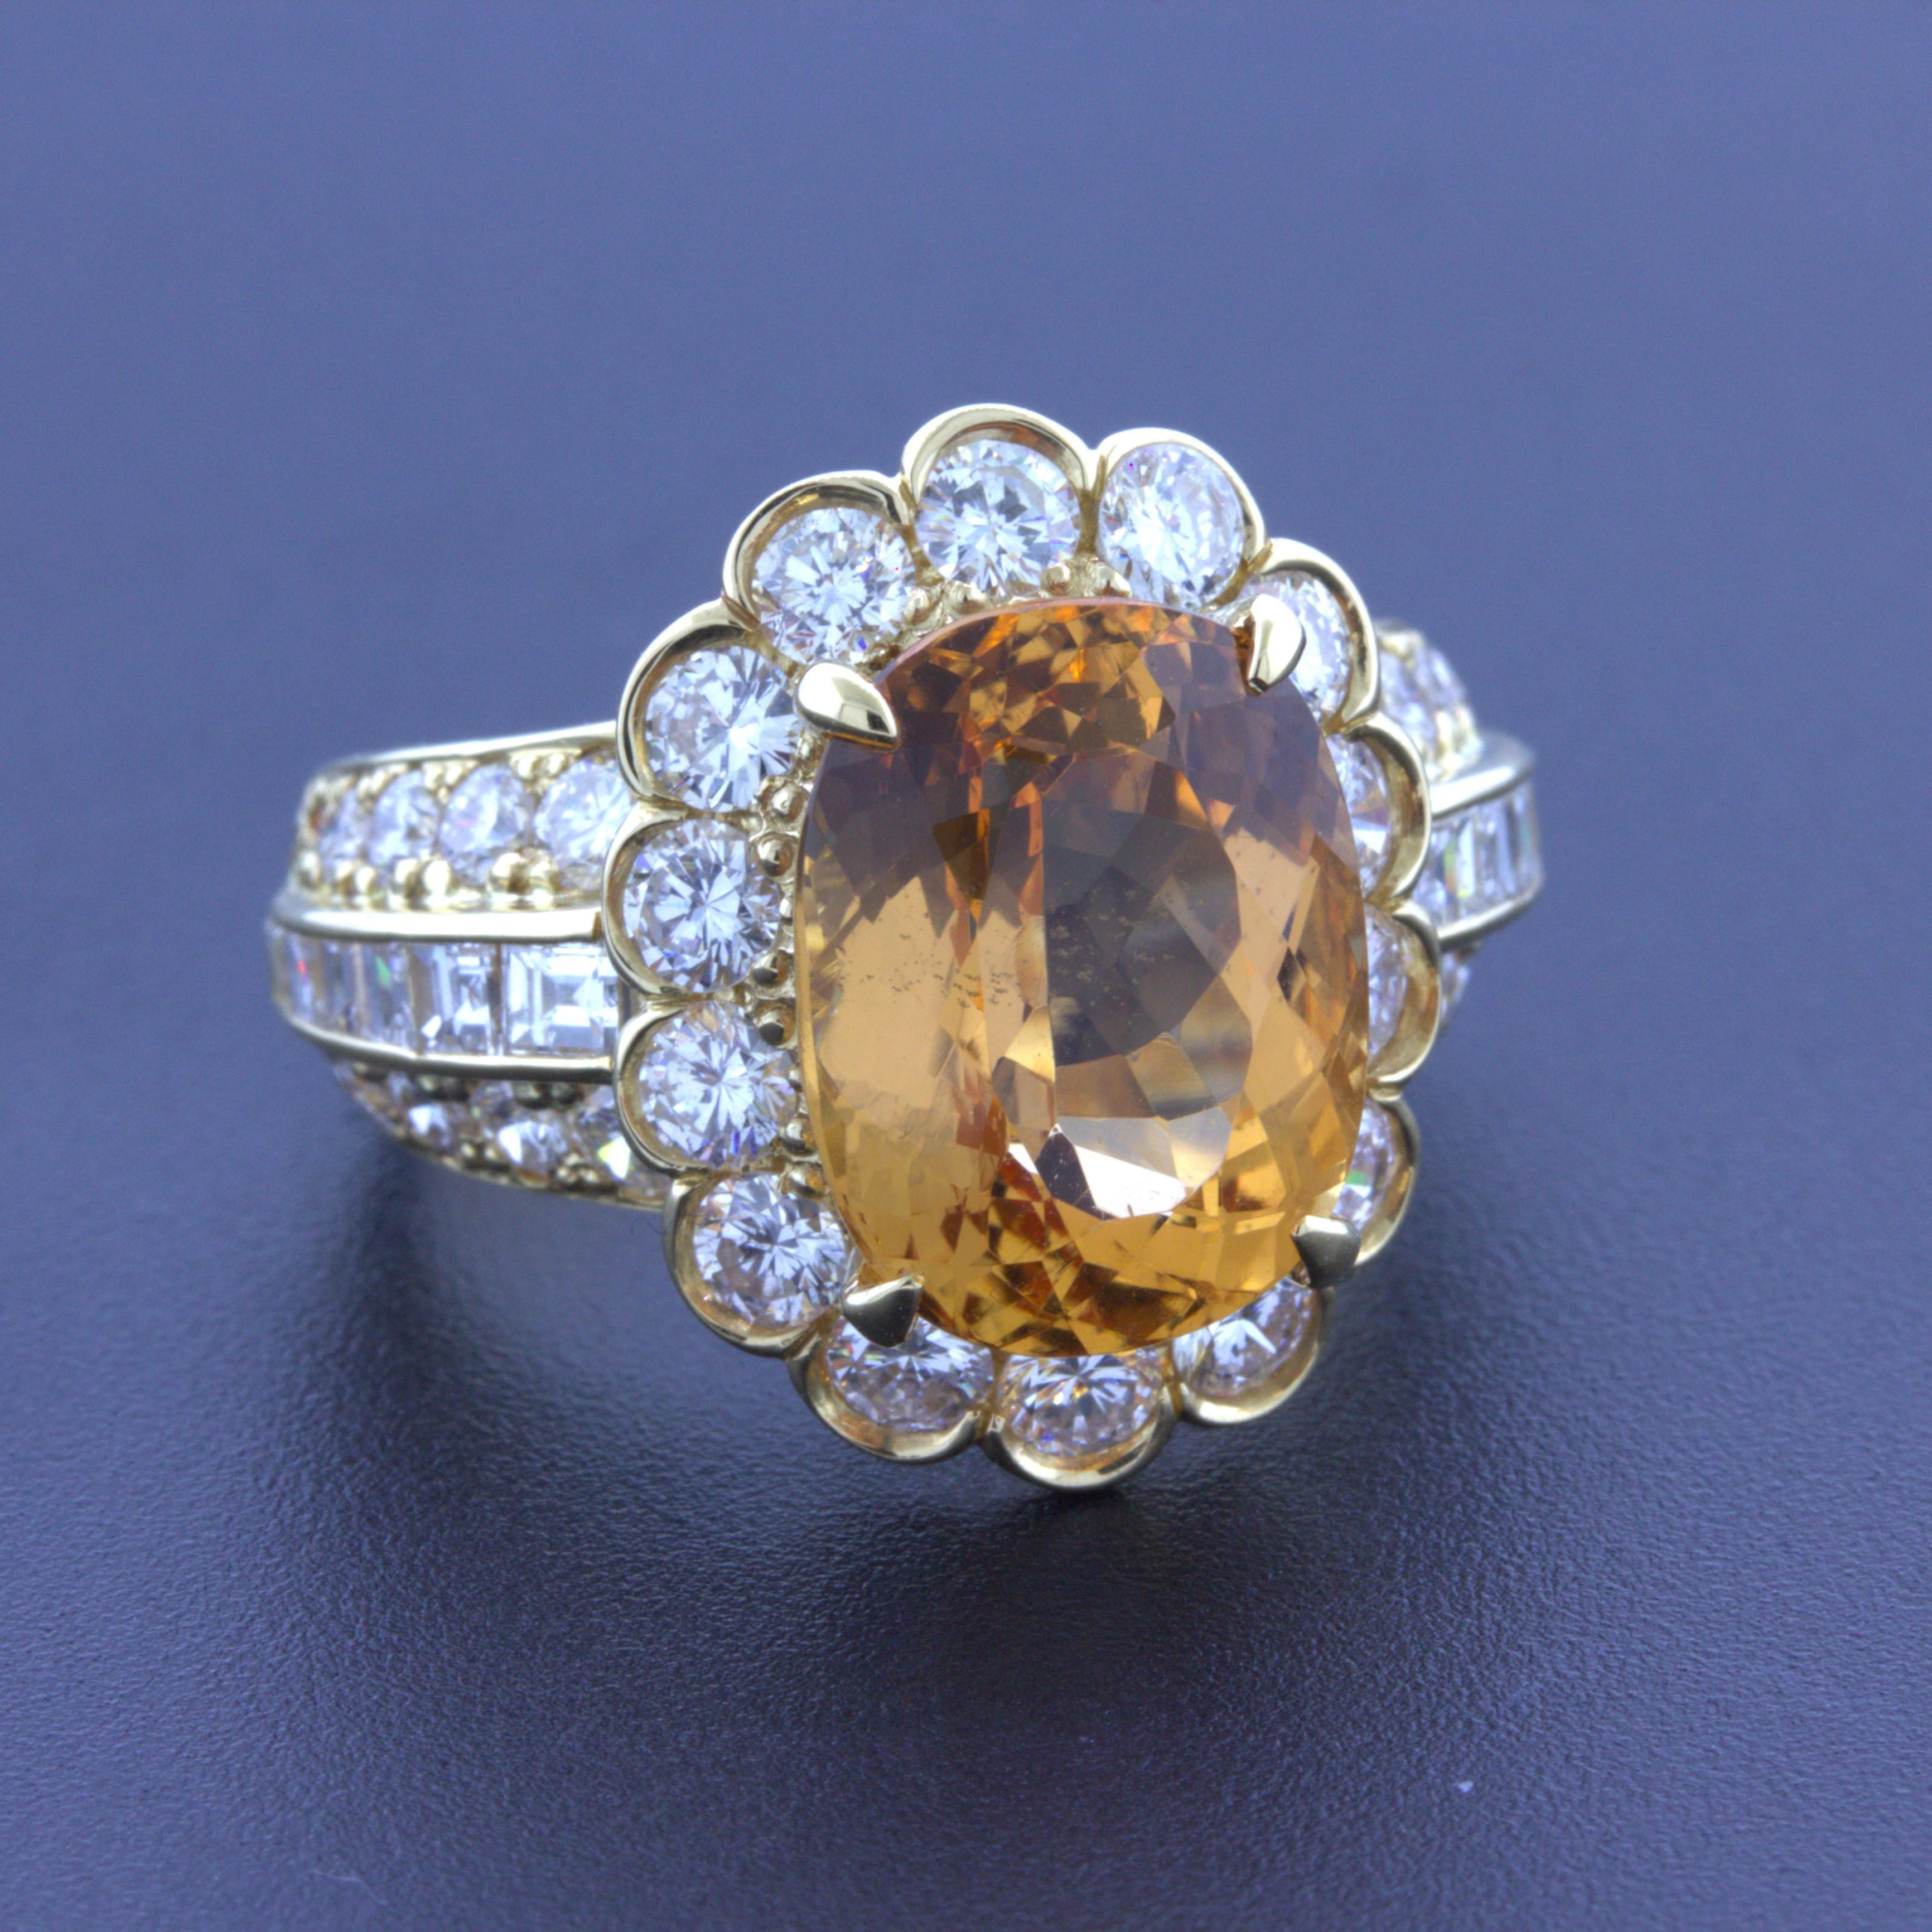 A chic and elegant ring featuring a fine 7.07 carat oval-shape imperial topaz. The topaz has a rich golden orangy-yellow color that radiates in the light. It is complemented by 2.45 carats of round brilliant and square-cut diamonds set around the